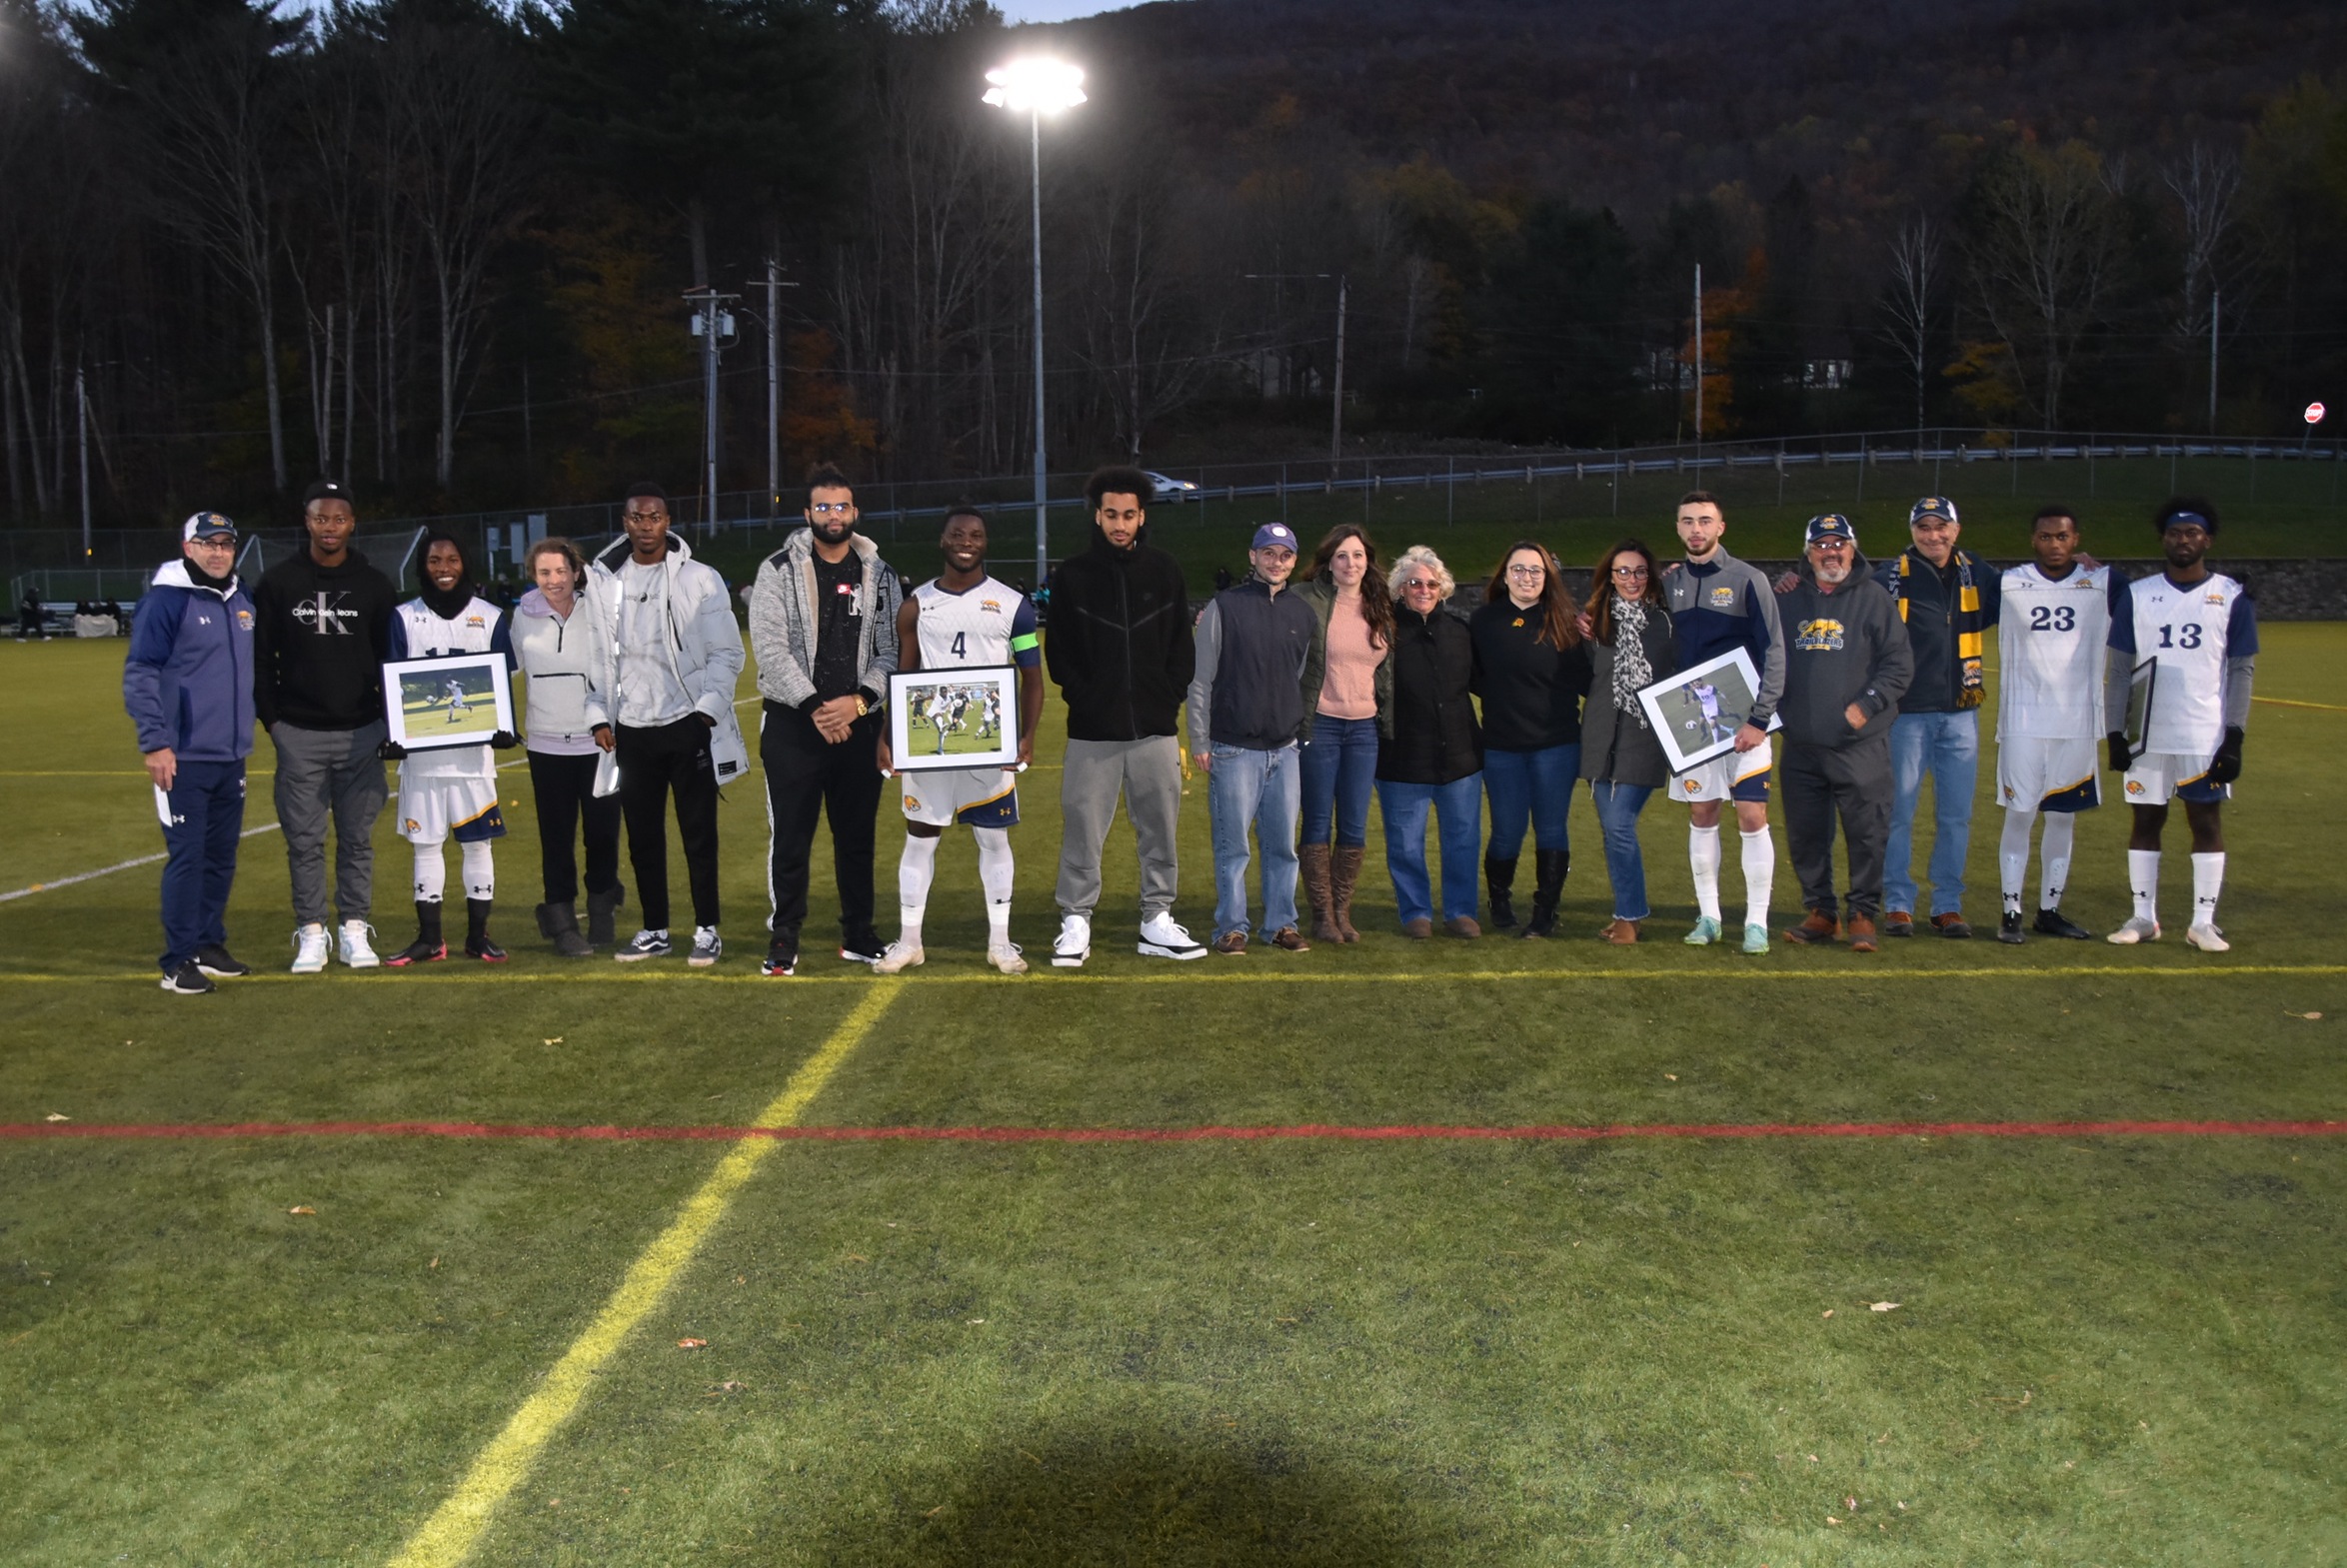 Men's Soccer falls 2-1 to Bears on Senior Day, await playoff fate